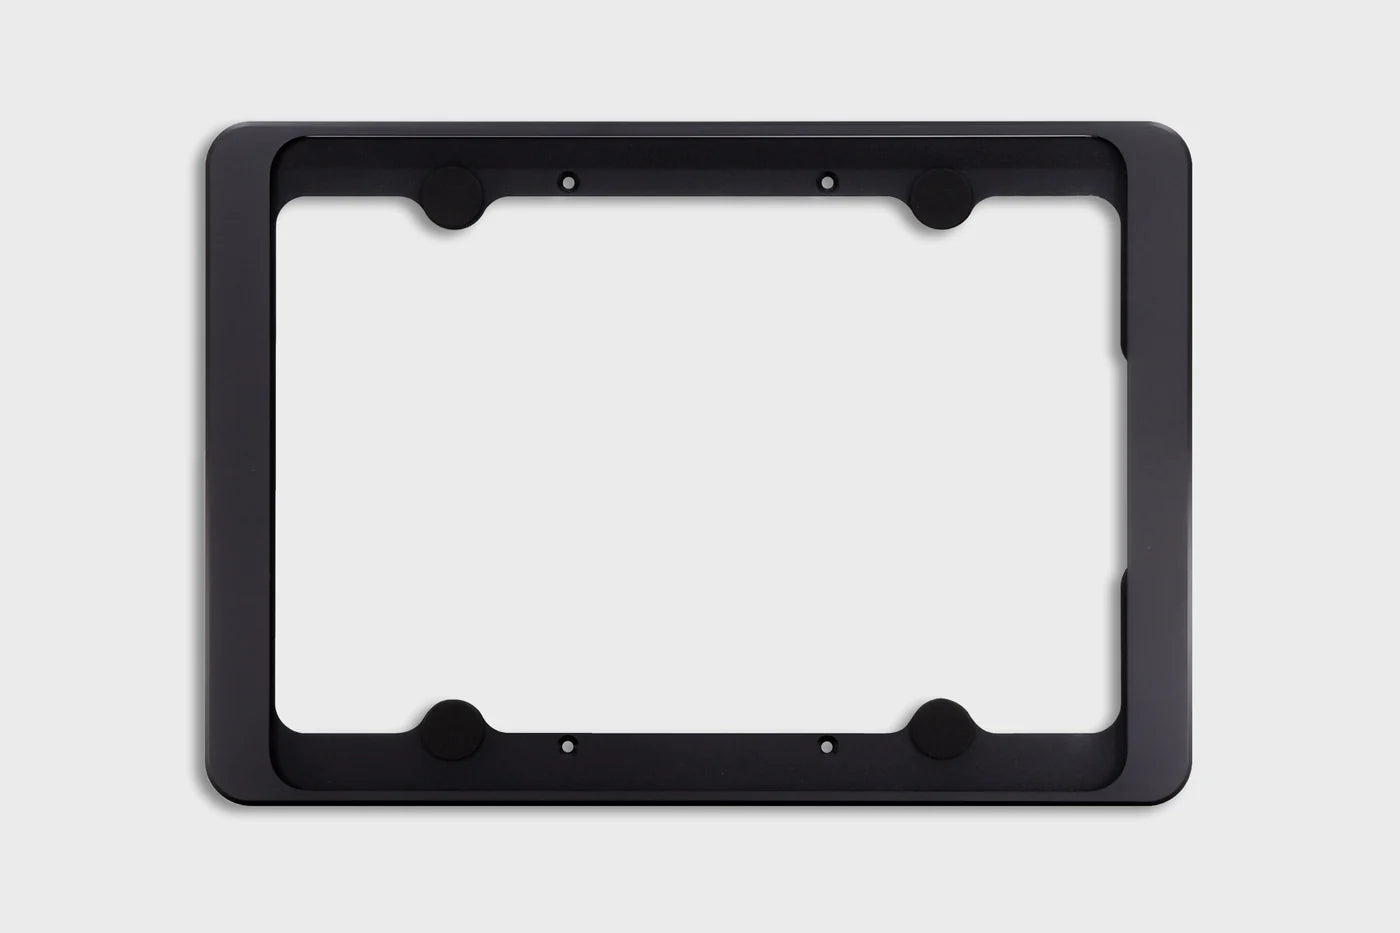 Dame Wall for iPad Pro 12.9" Black Anodized